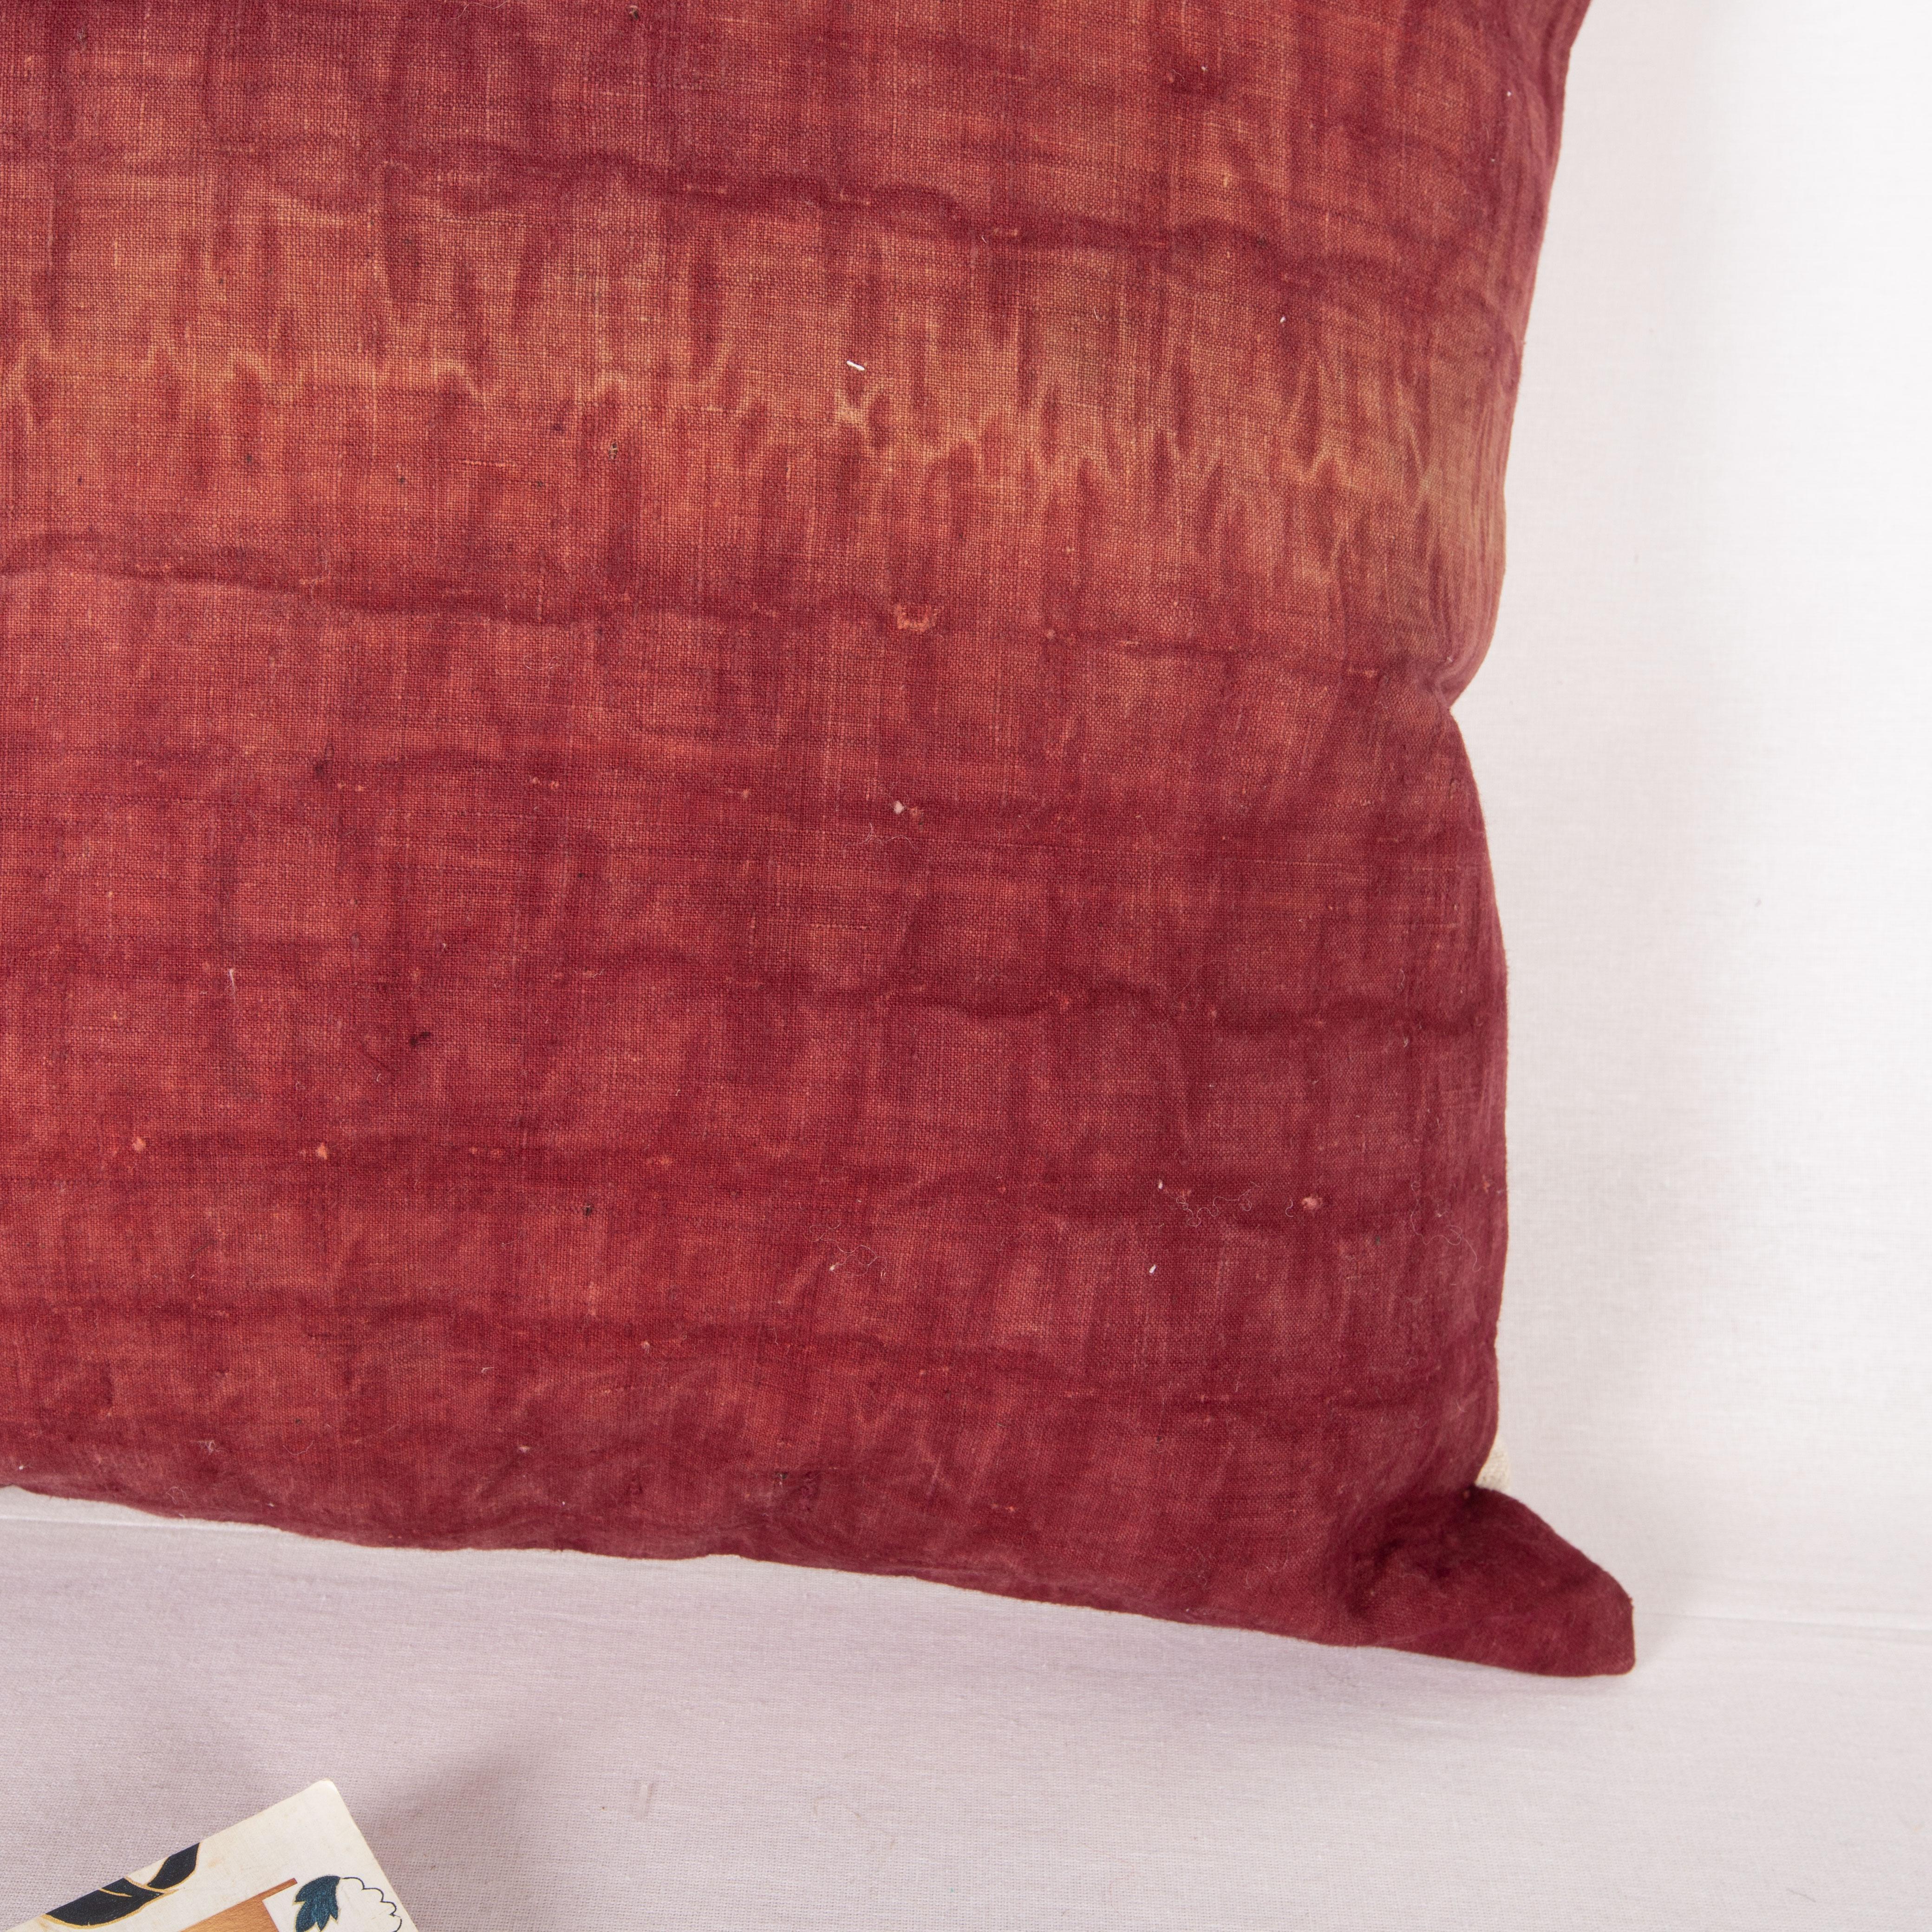 Madder Red Pillow Cover Made from an Early 20th C. Quilt Top, Turkey In Good Condition For Sale In Istanbul, TR